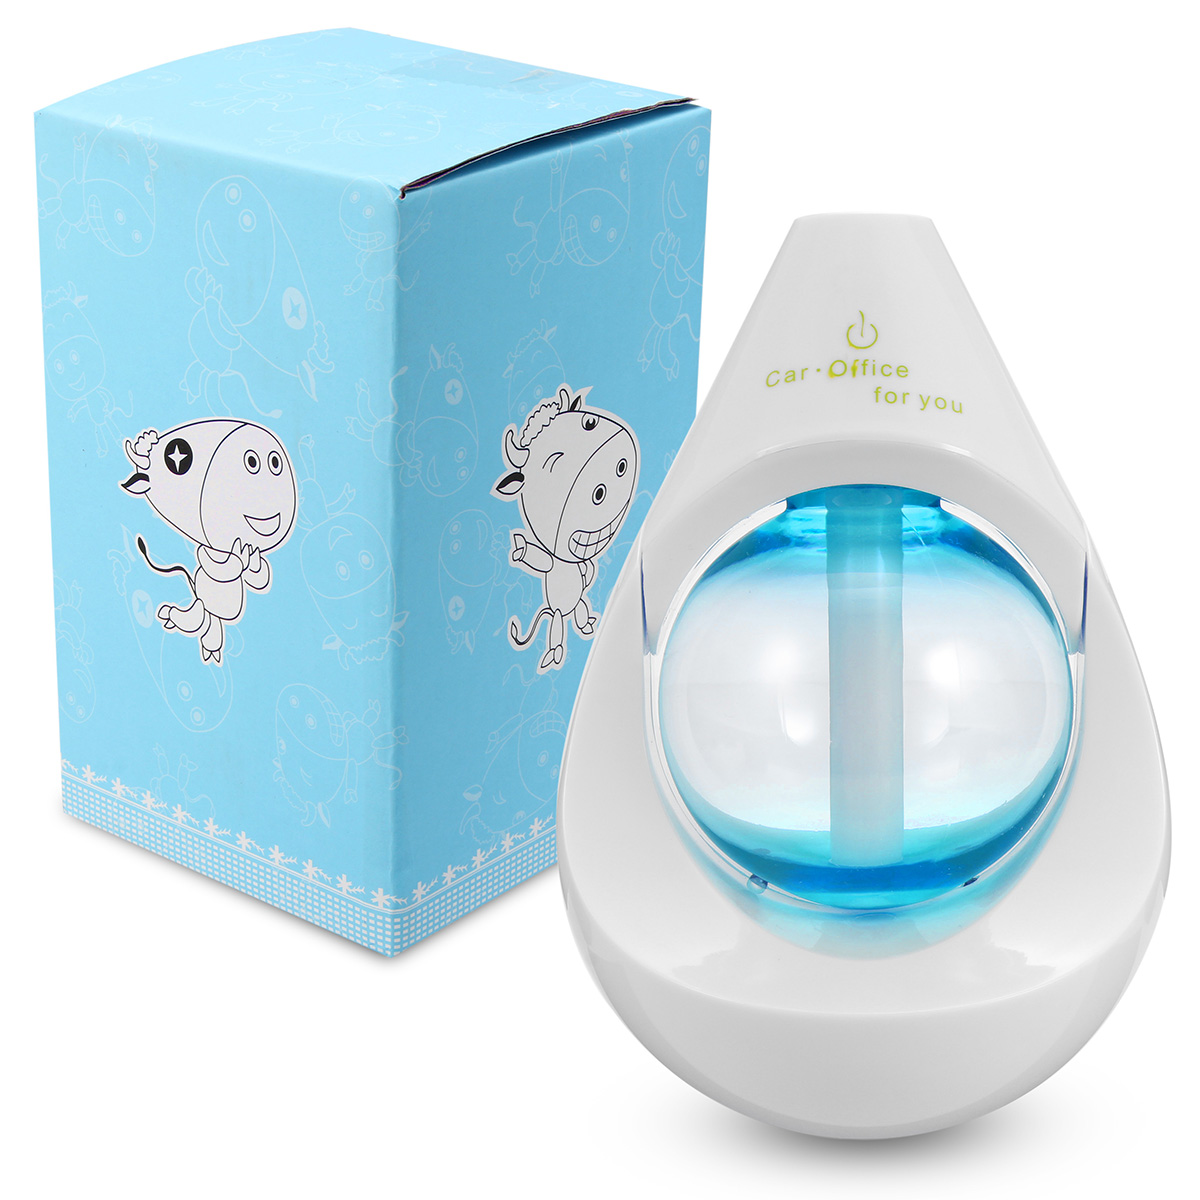 

USB Essential Oil Aroma Diffuser Humidifier Mist Air Purifier Aromatherapy